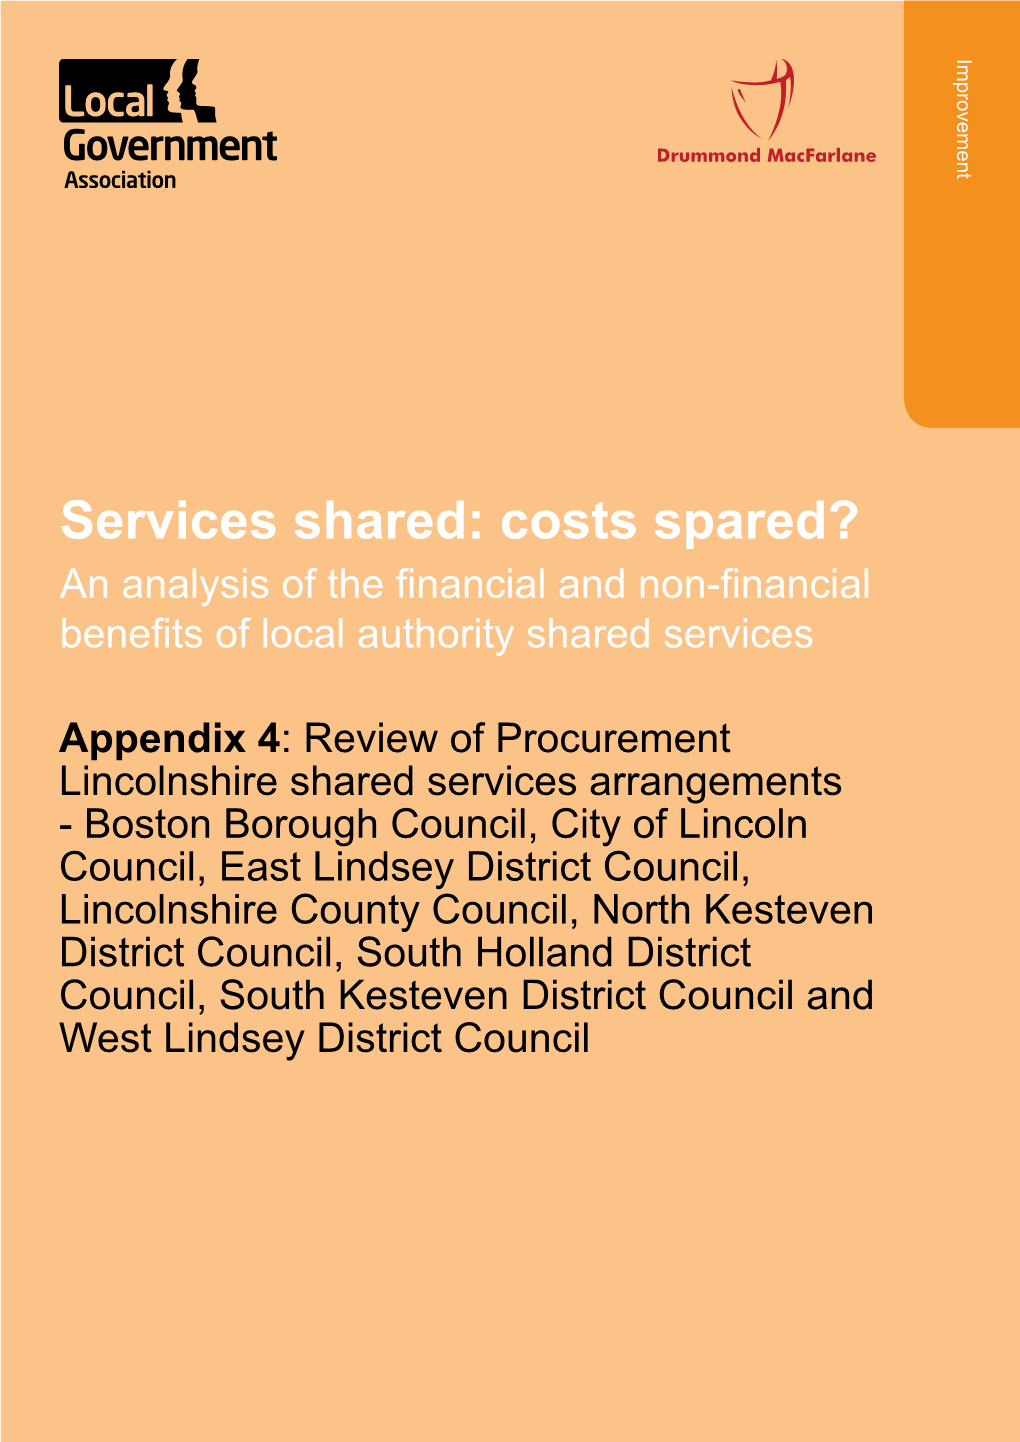 Services Shared: Costs Spared? an Analysis of the Financial and Non-Financial Benefits of Local Authority Shared Services